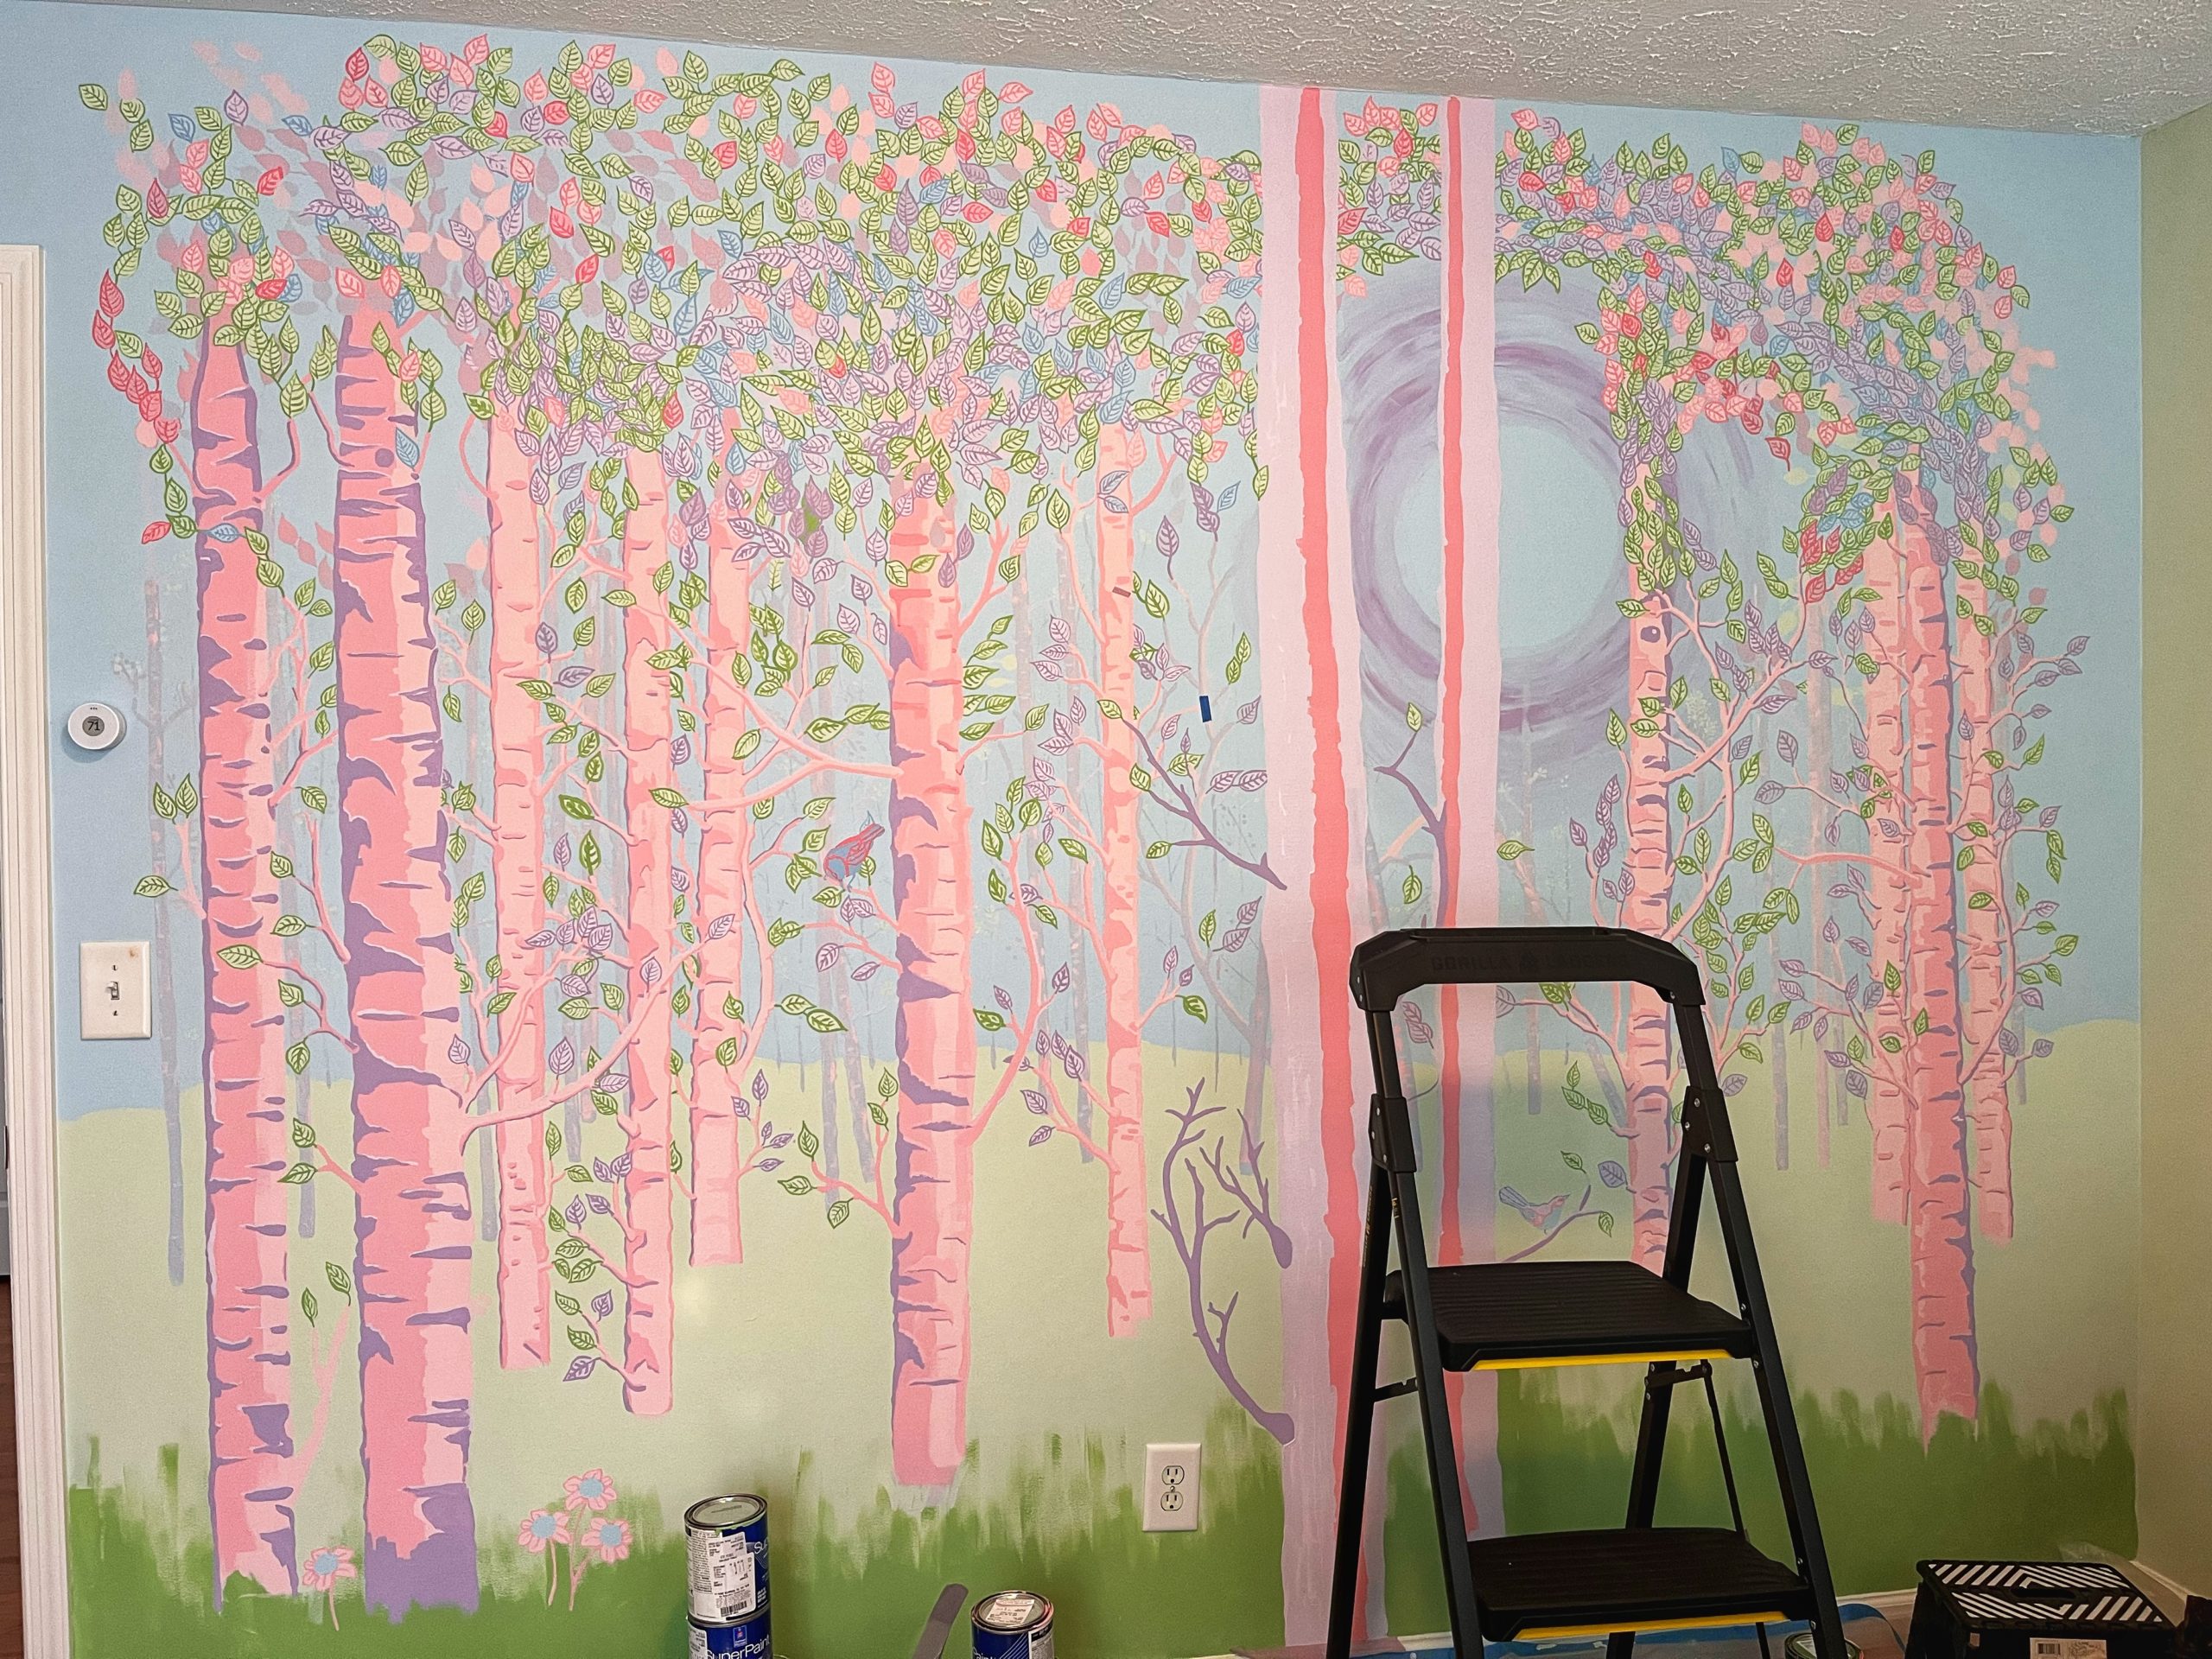 Painting of a primarily pink and purple fantasy forest, incomplete.